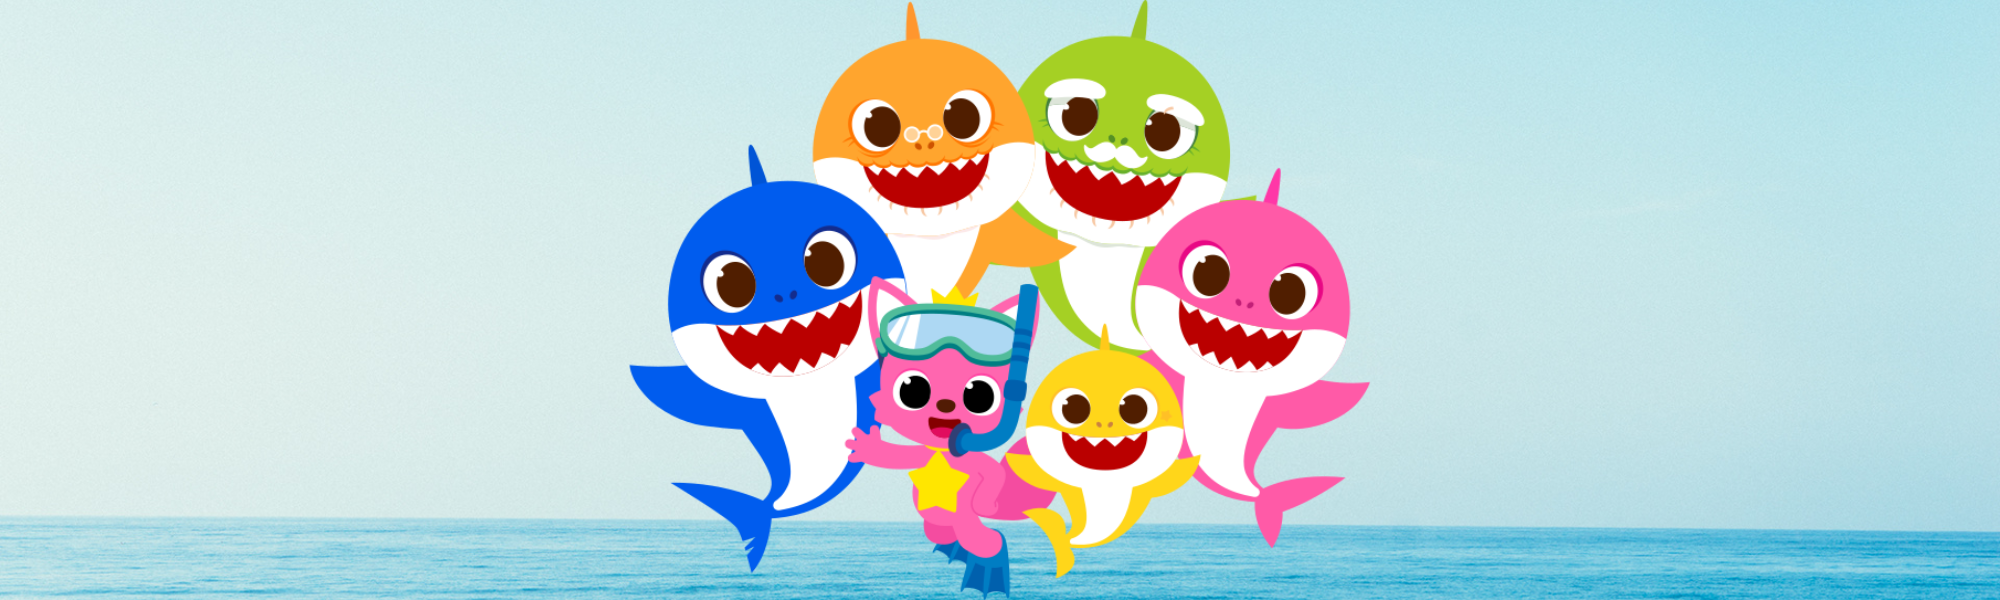 10 Lesser-Known Facts About Baby Shark!